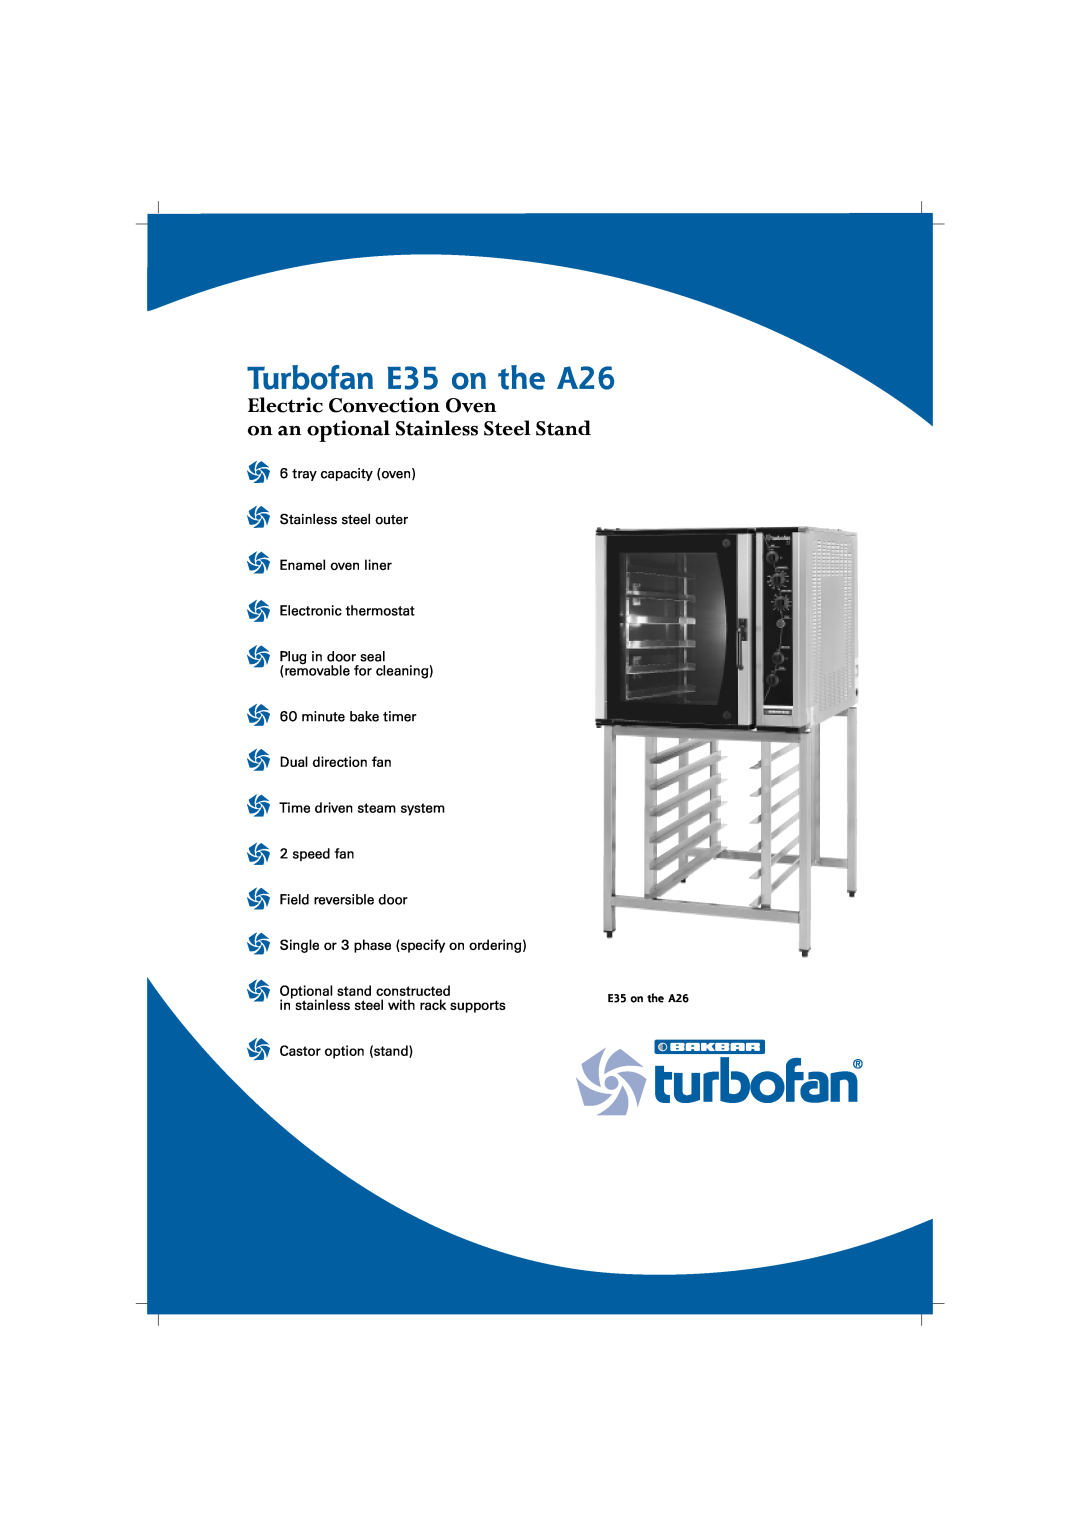 Moffat Bakbar E35 manual Turbofan E35 on the A26, Electric Convection Oven, on an optional Stainless Steel Stand 